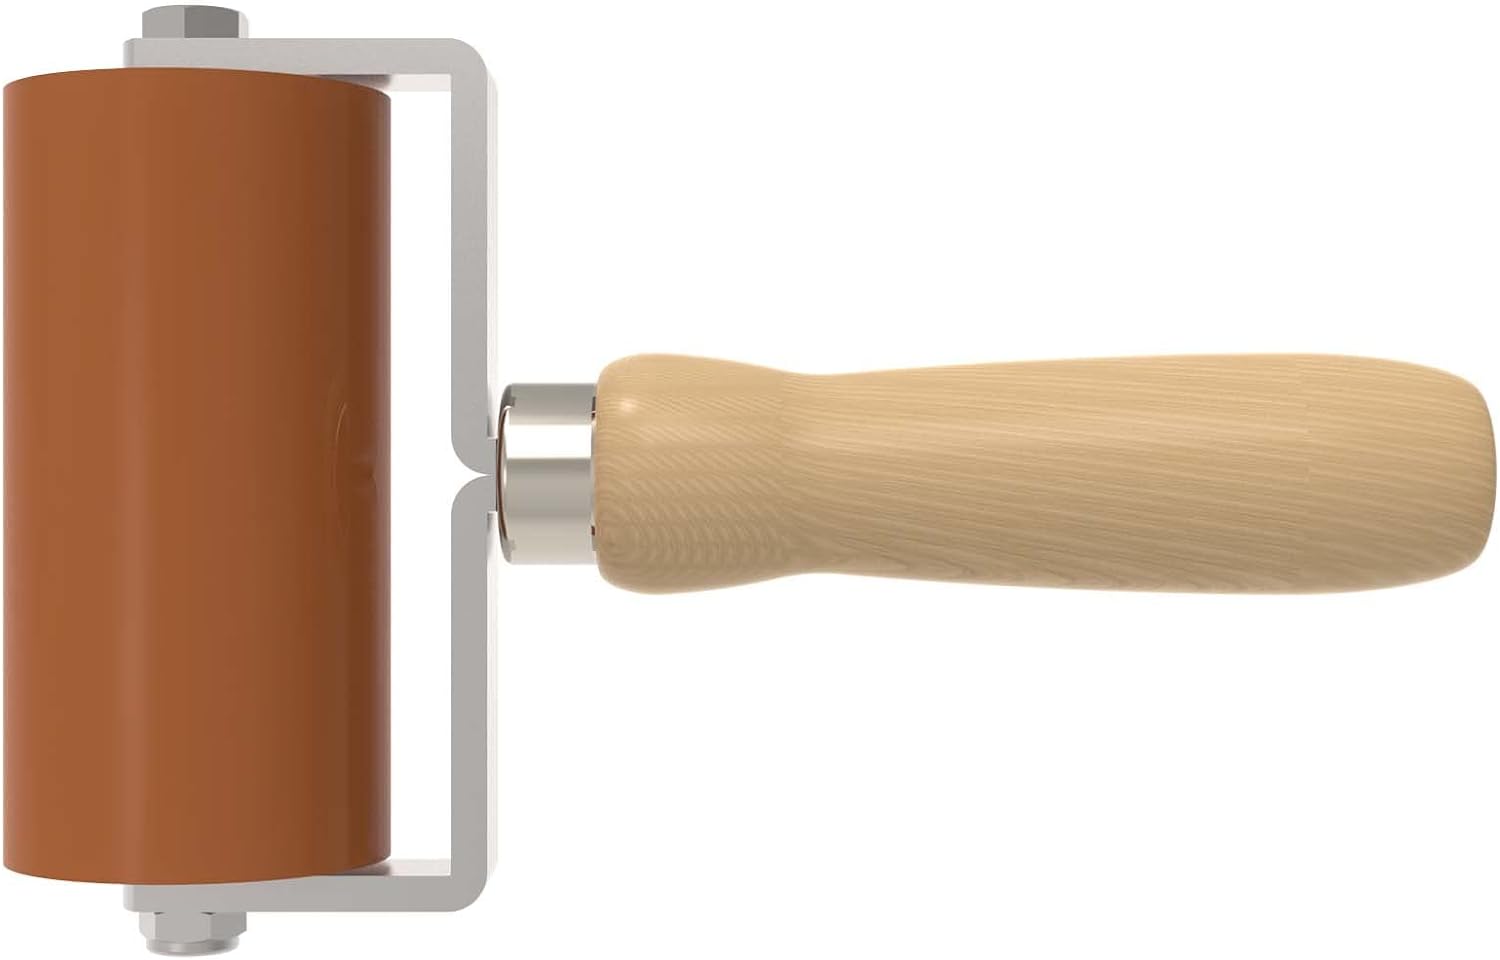 Everhard Seam Roller | 4" Silicone Roller | 5" Wood Handle